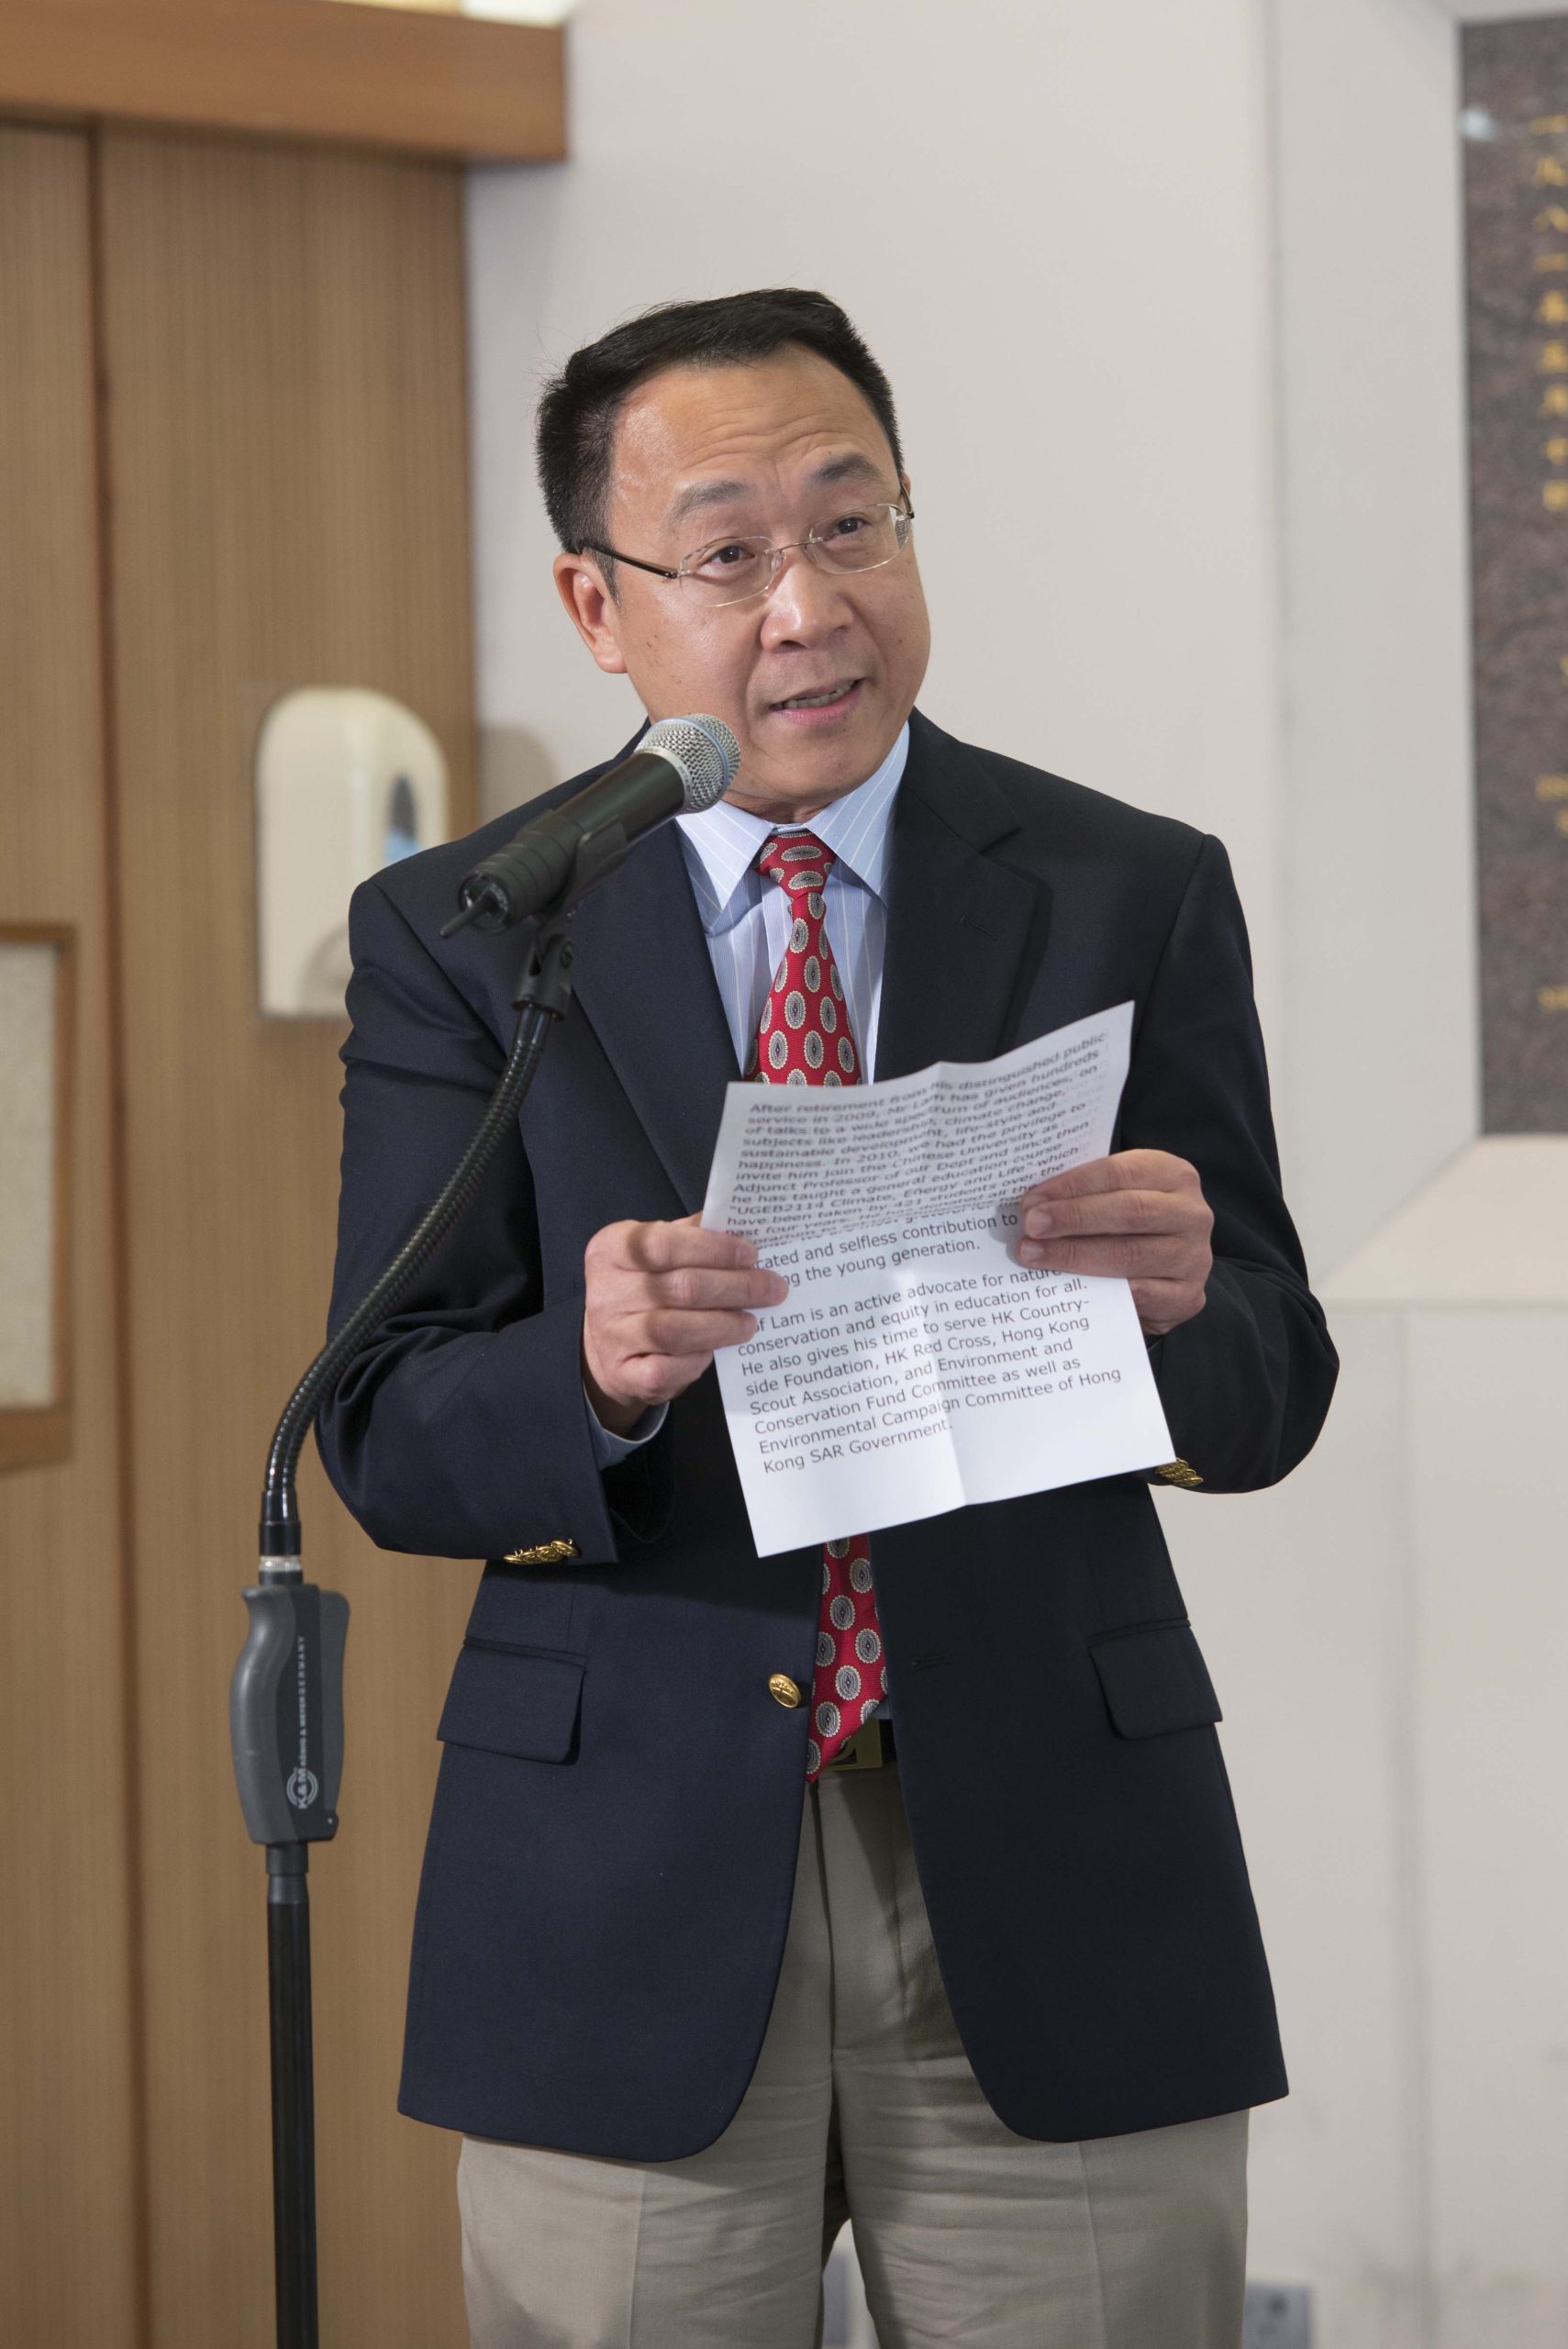 Introduction of Prof. Lam by Prof. Chen Yongqin<br />
(nominator of Prof. Lam Chiu Ying)